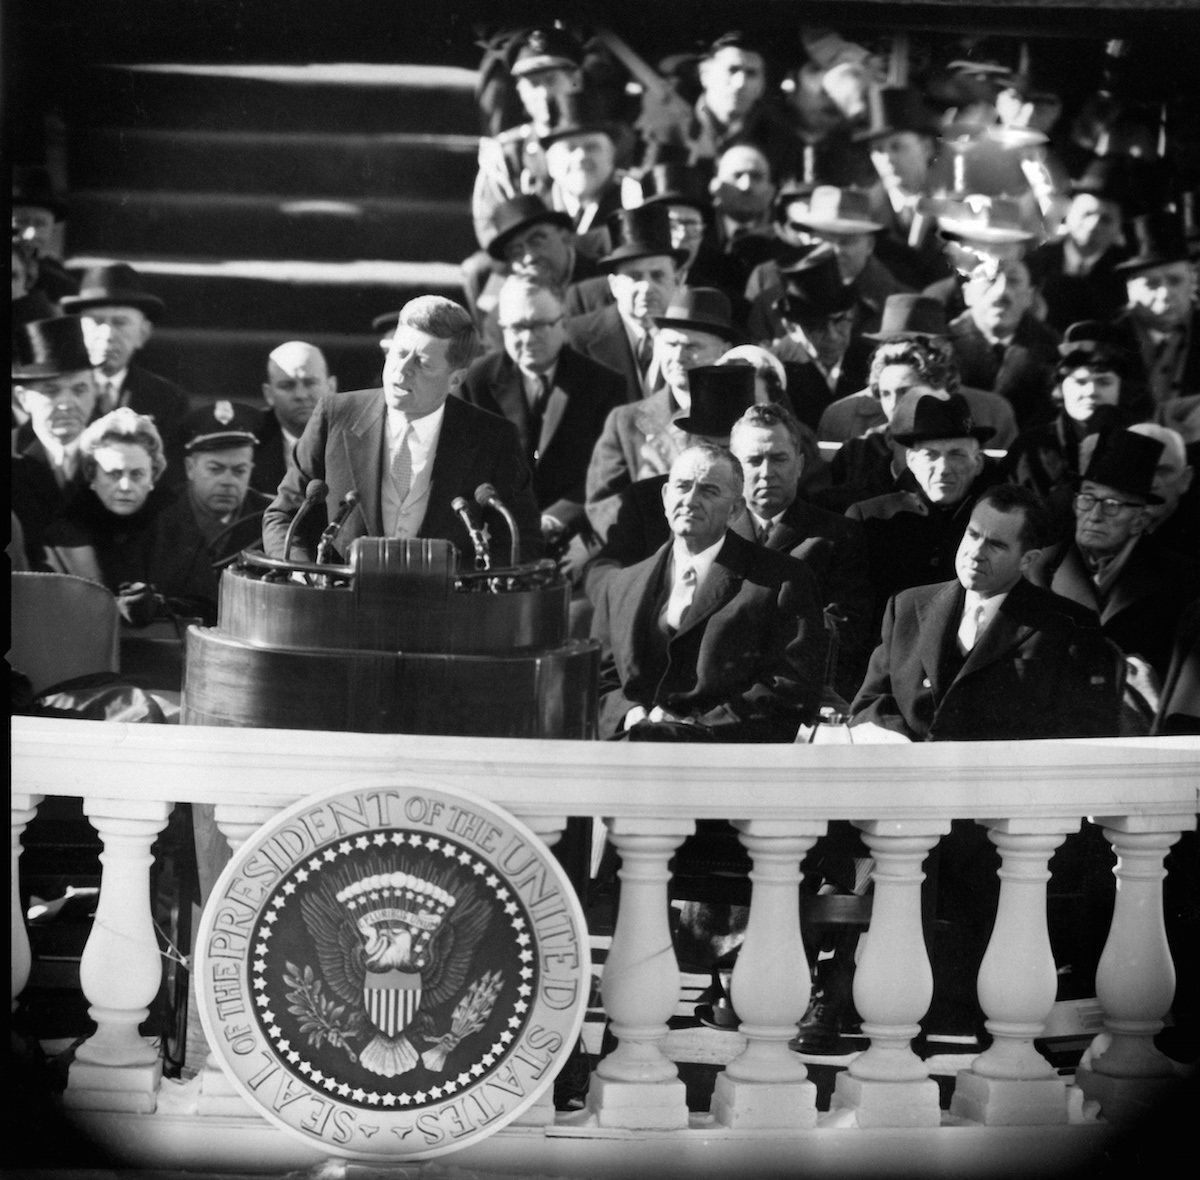 President John F. Kennedy delivering his inaugural speech, Jan. 20, 1961. (CBS Photo Archive / Getty Images)